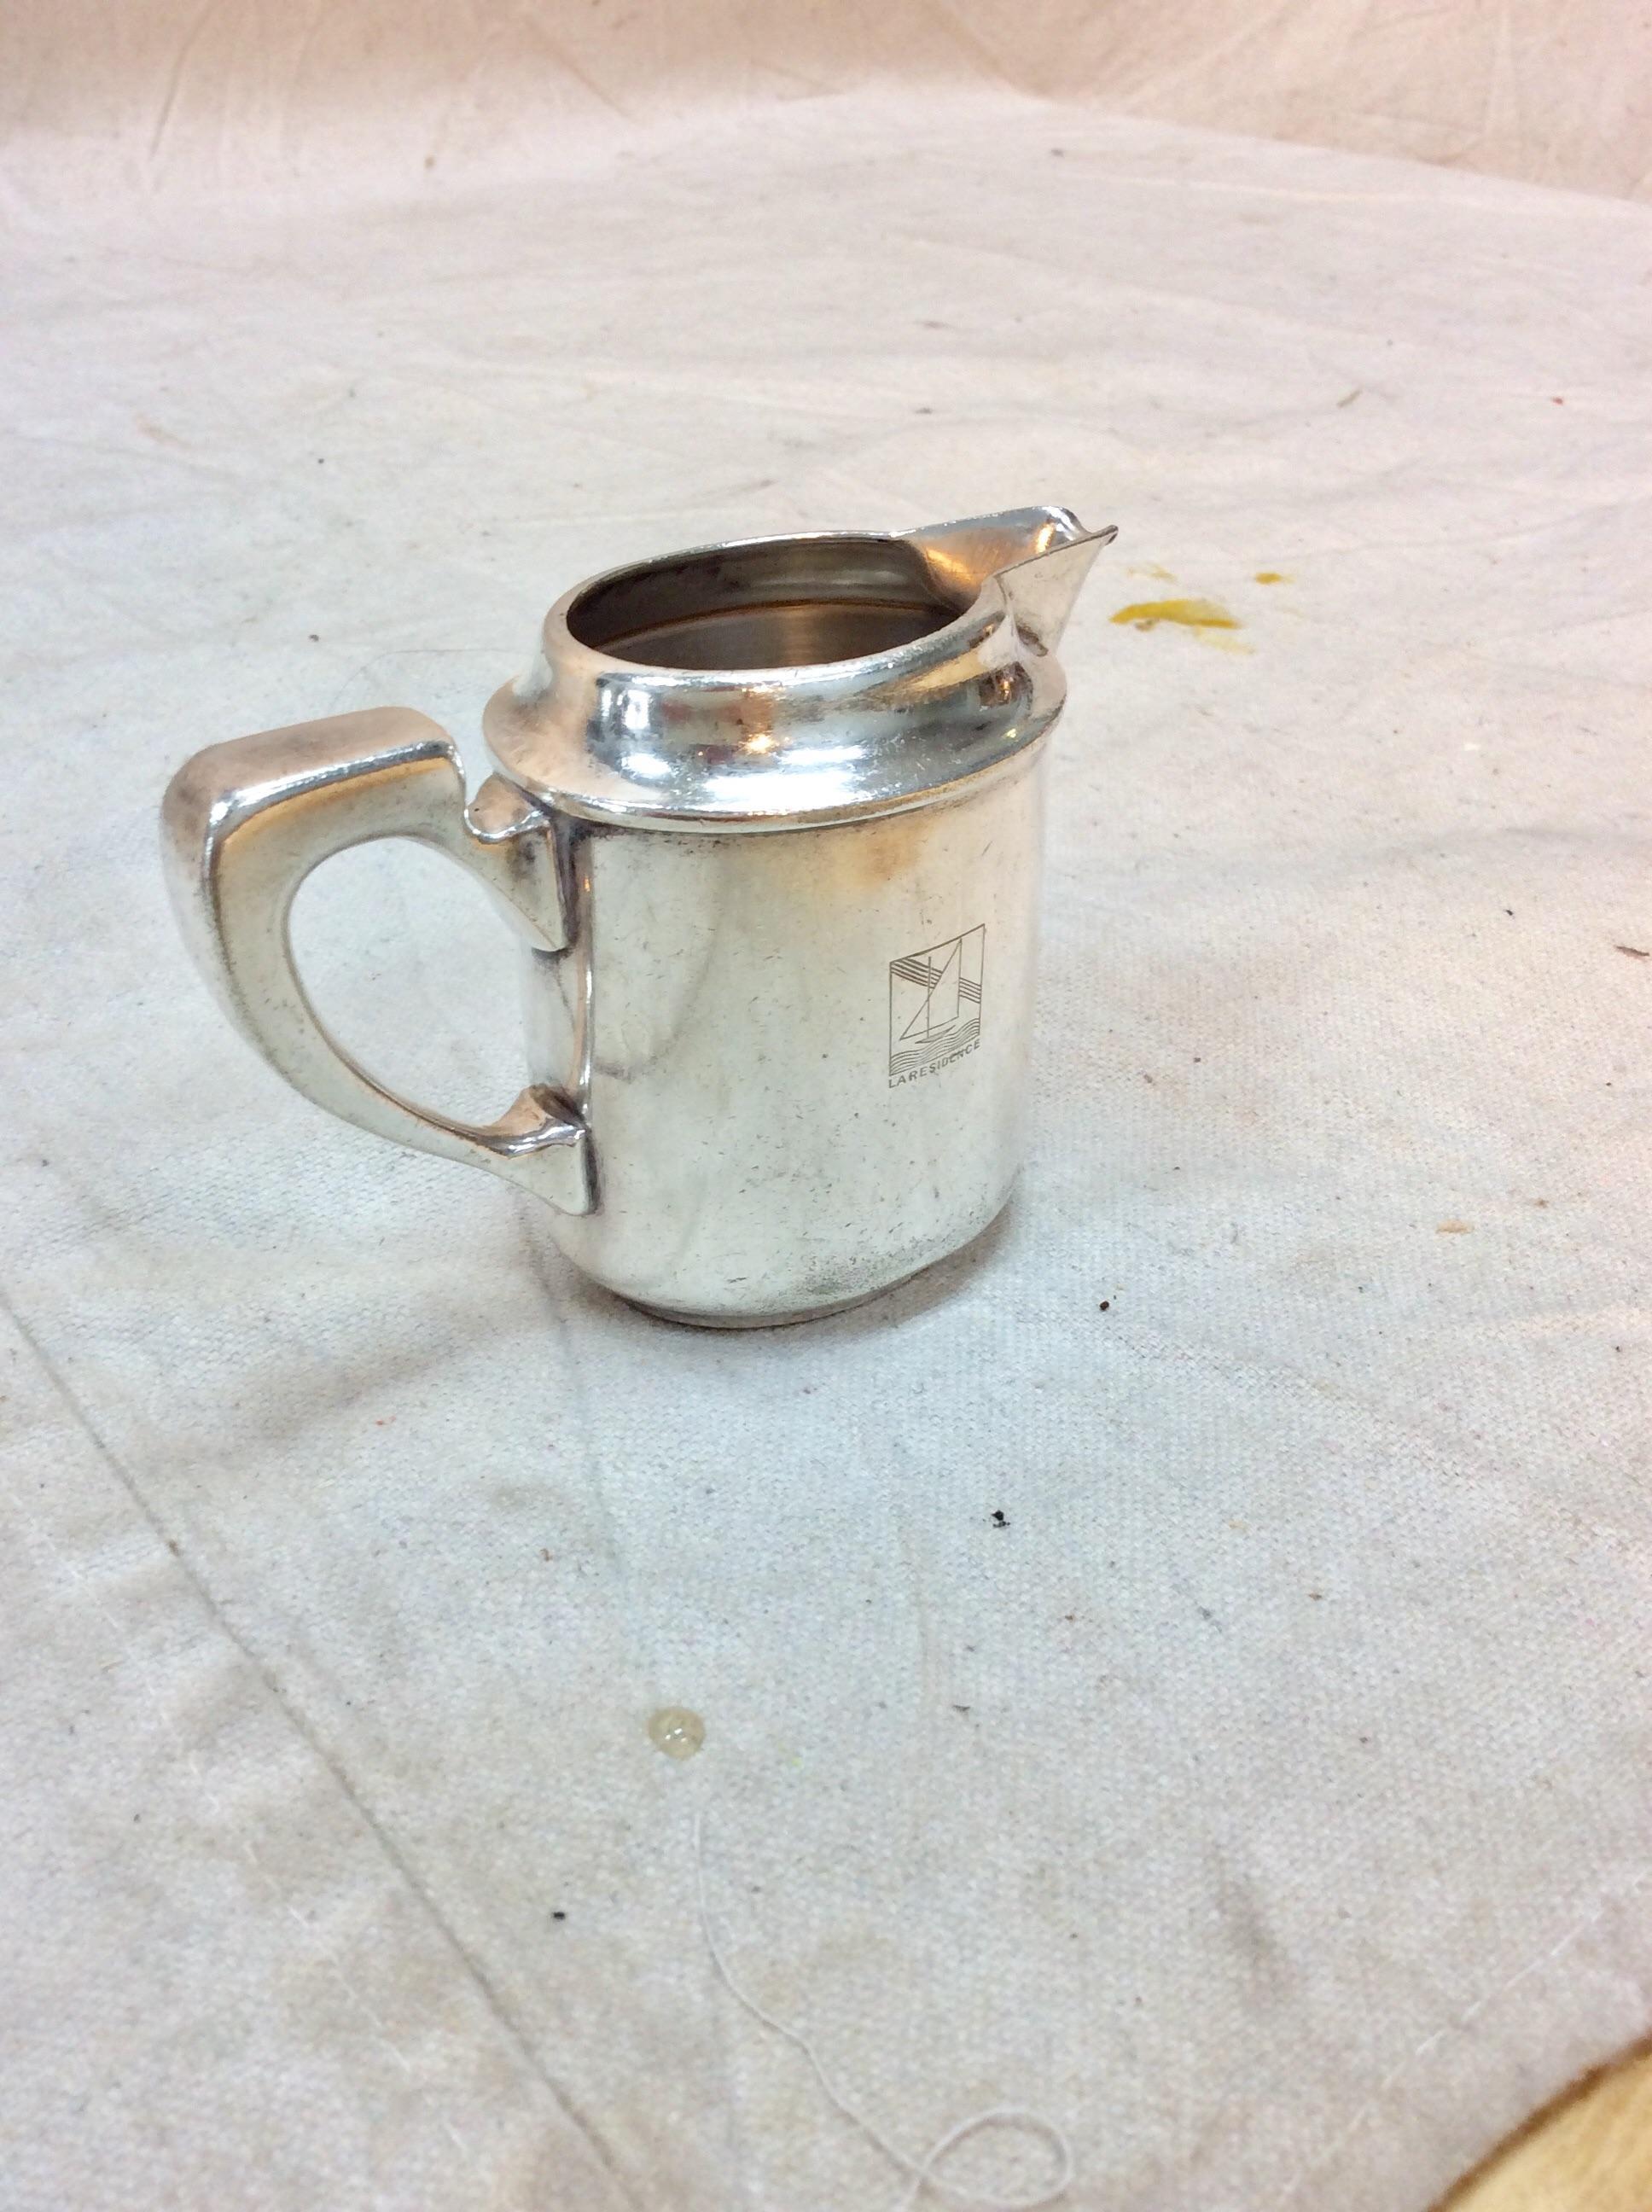 Found in the South of France, this 20th Century Hotel Silver Silverplate Creamer was manufactured by Christofle and produced for the La Residence Hotel. The piece is hallmarked on the side with an emblem that is most likely the hotel logo with La